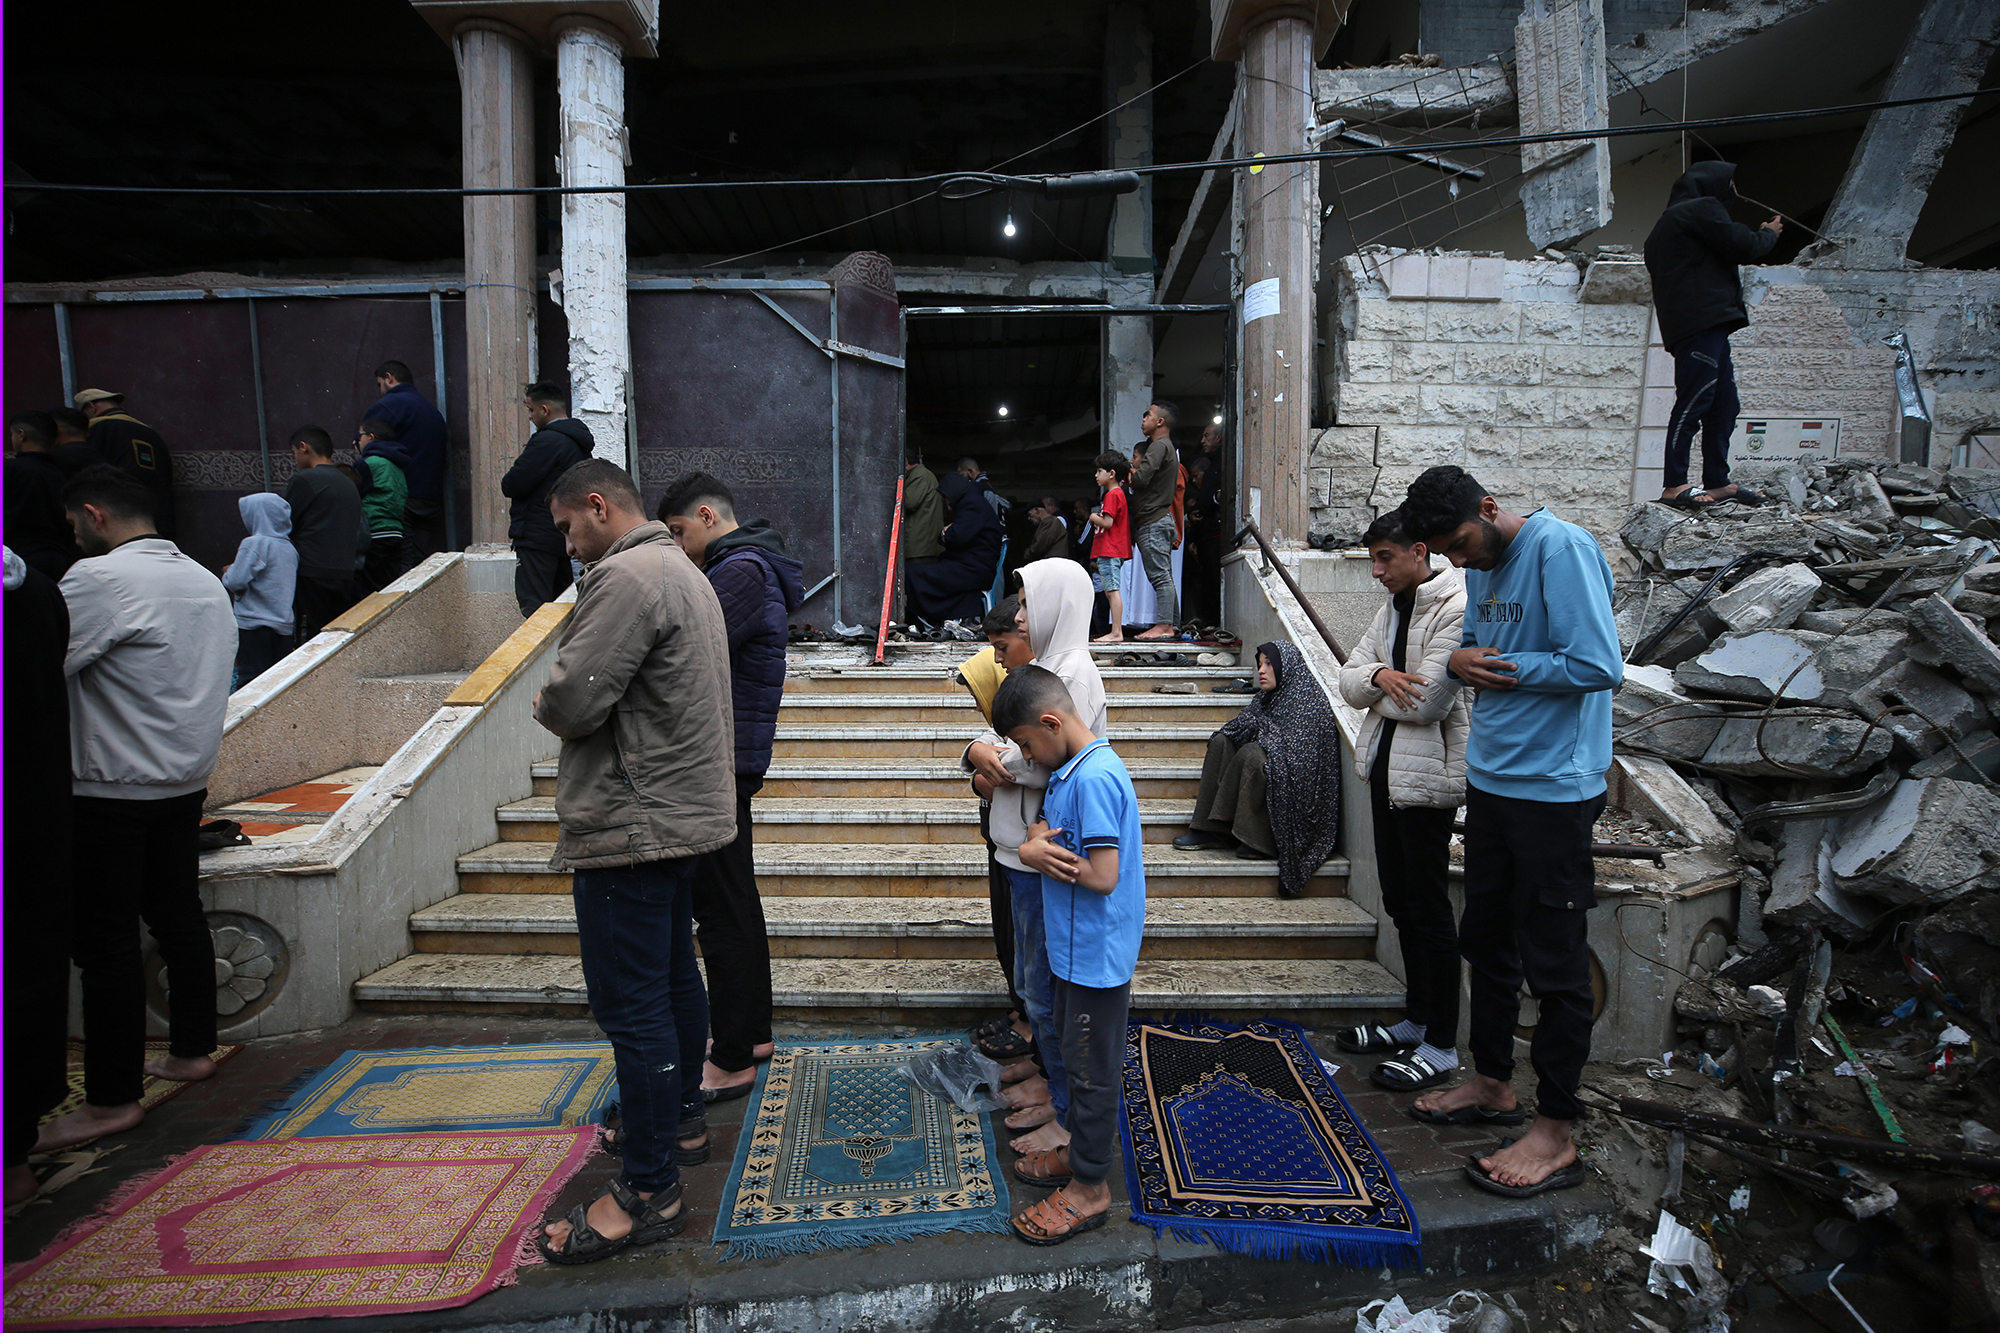 Muslims gather to perform Eid al-Fitr prayers at al-Huda mosque, which was heavily damaged after Israeli attacks in Rafah, Gaza, on April 10.